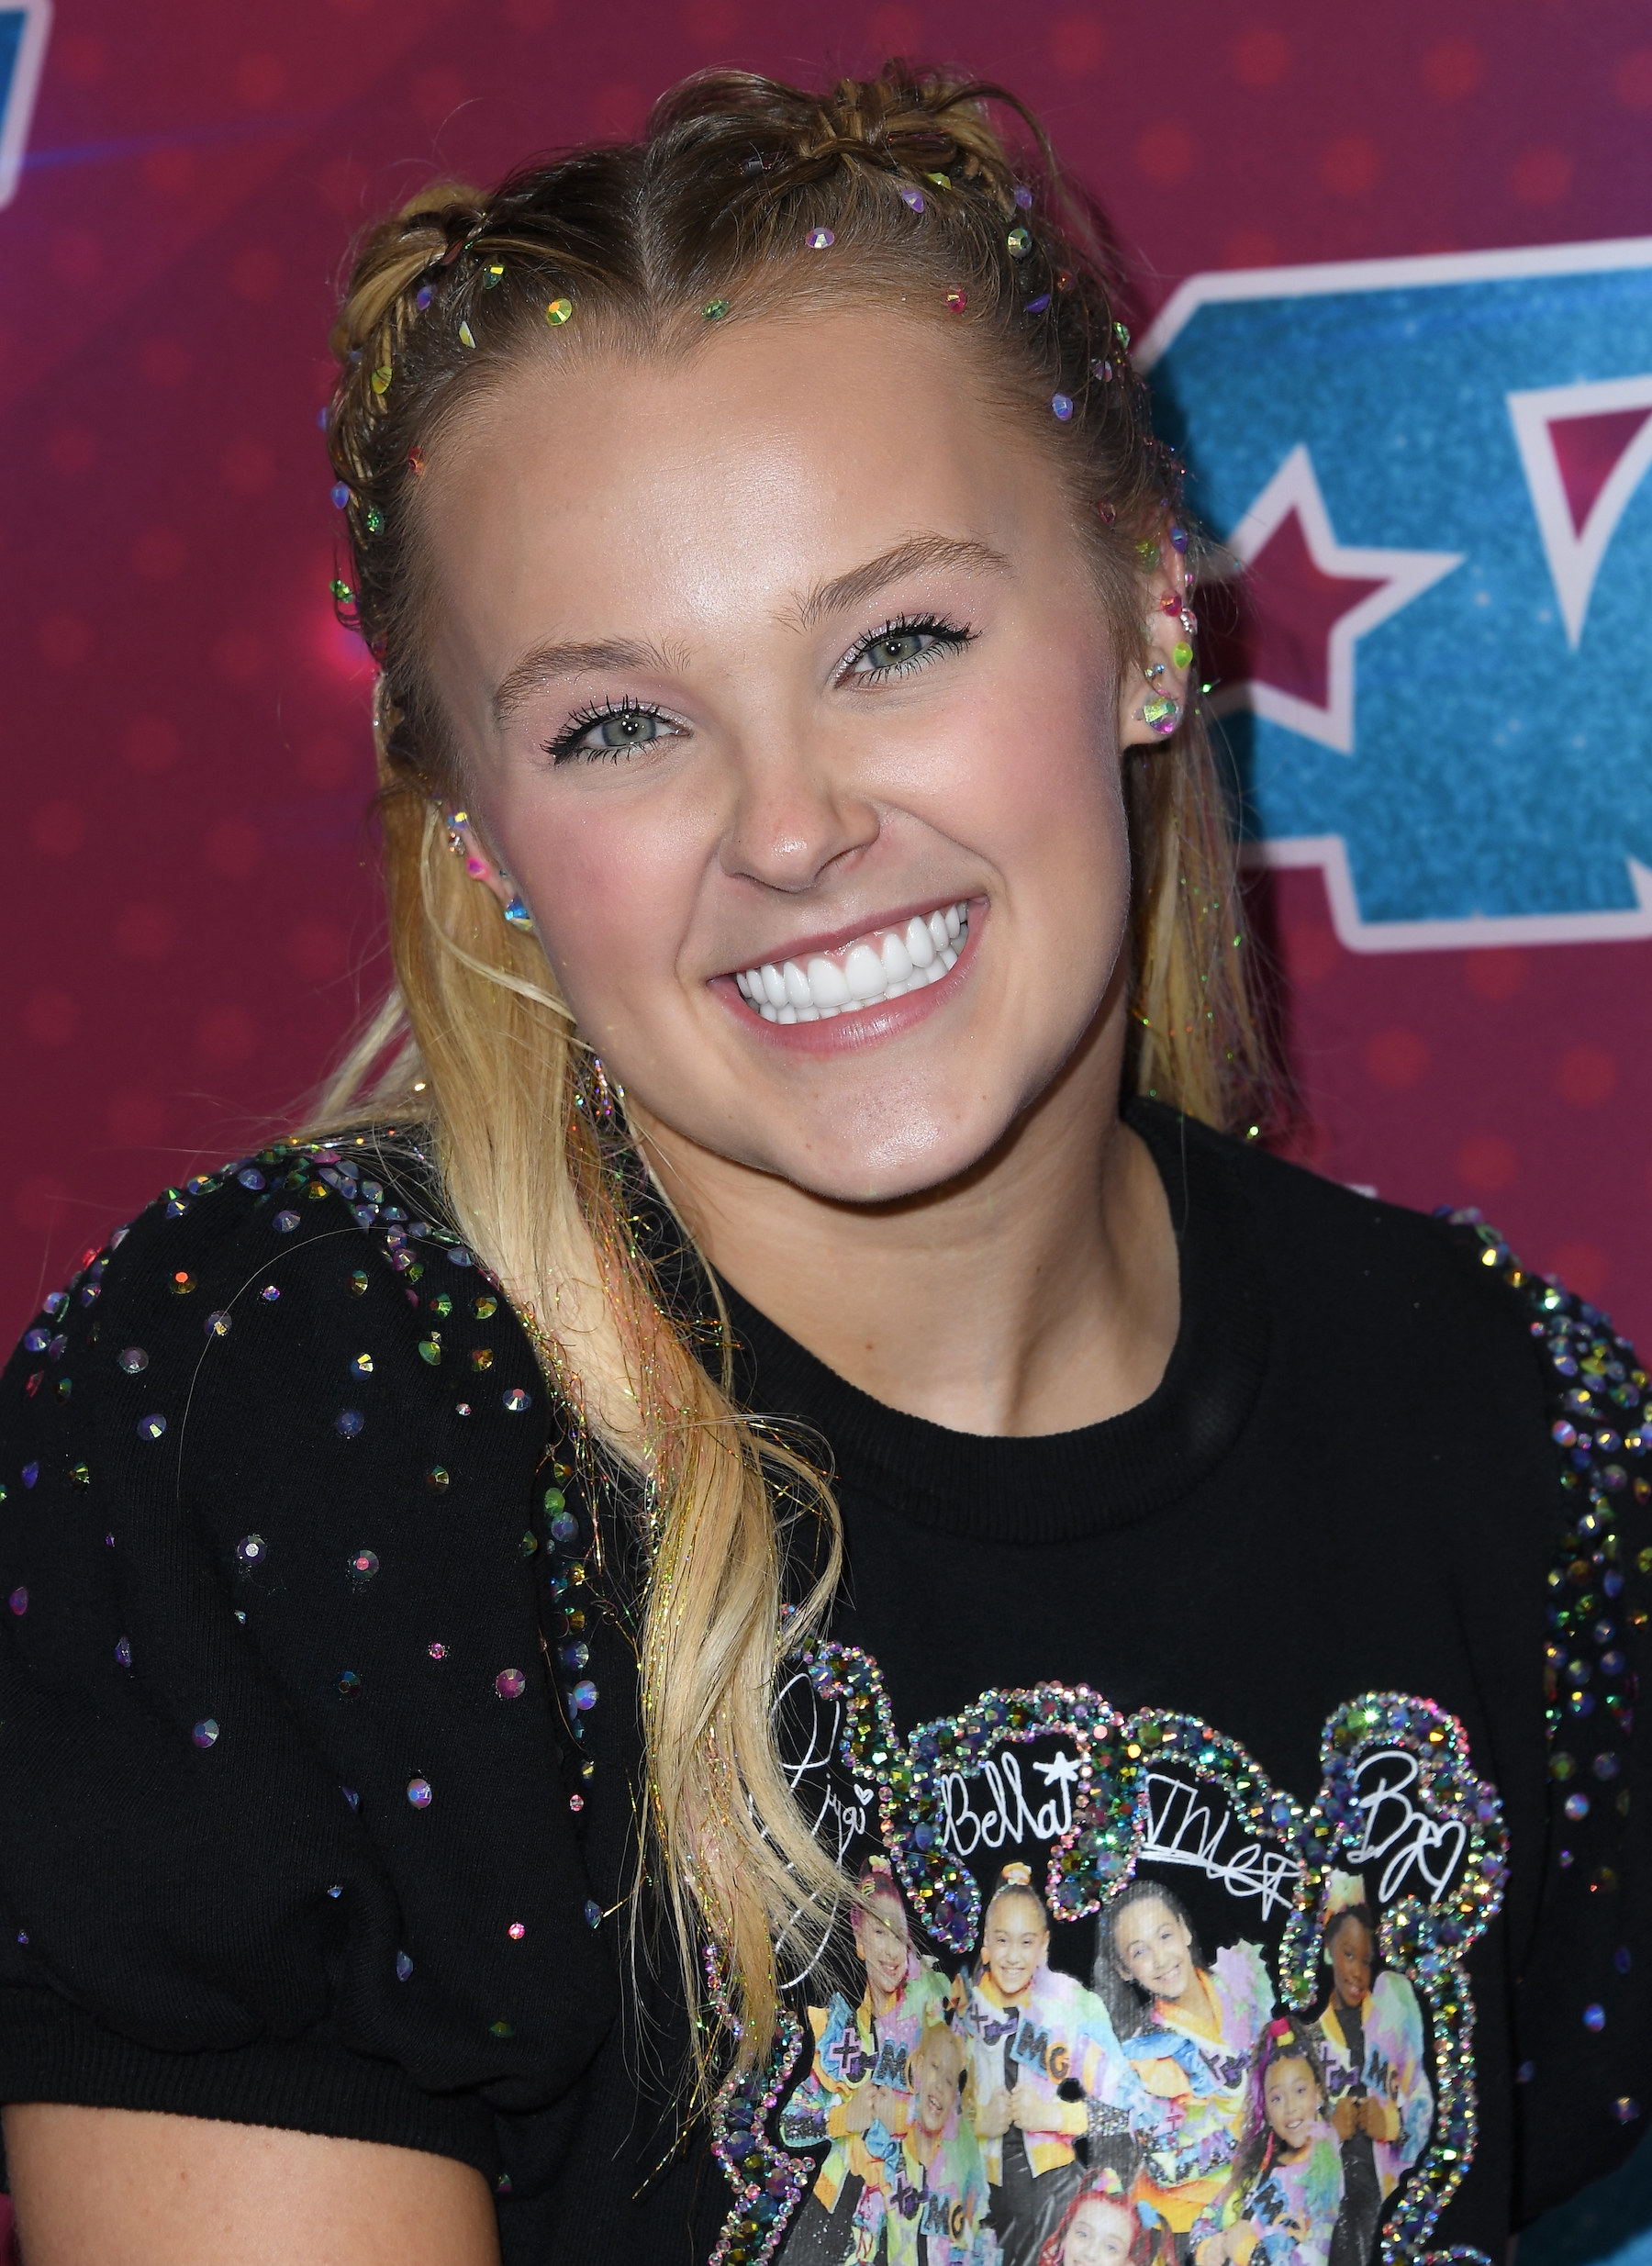 Close-up of JoJo smiling and wearing a bejeweled T-shirt